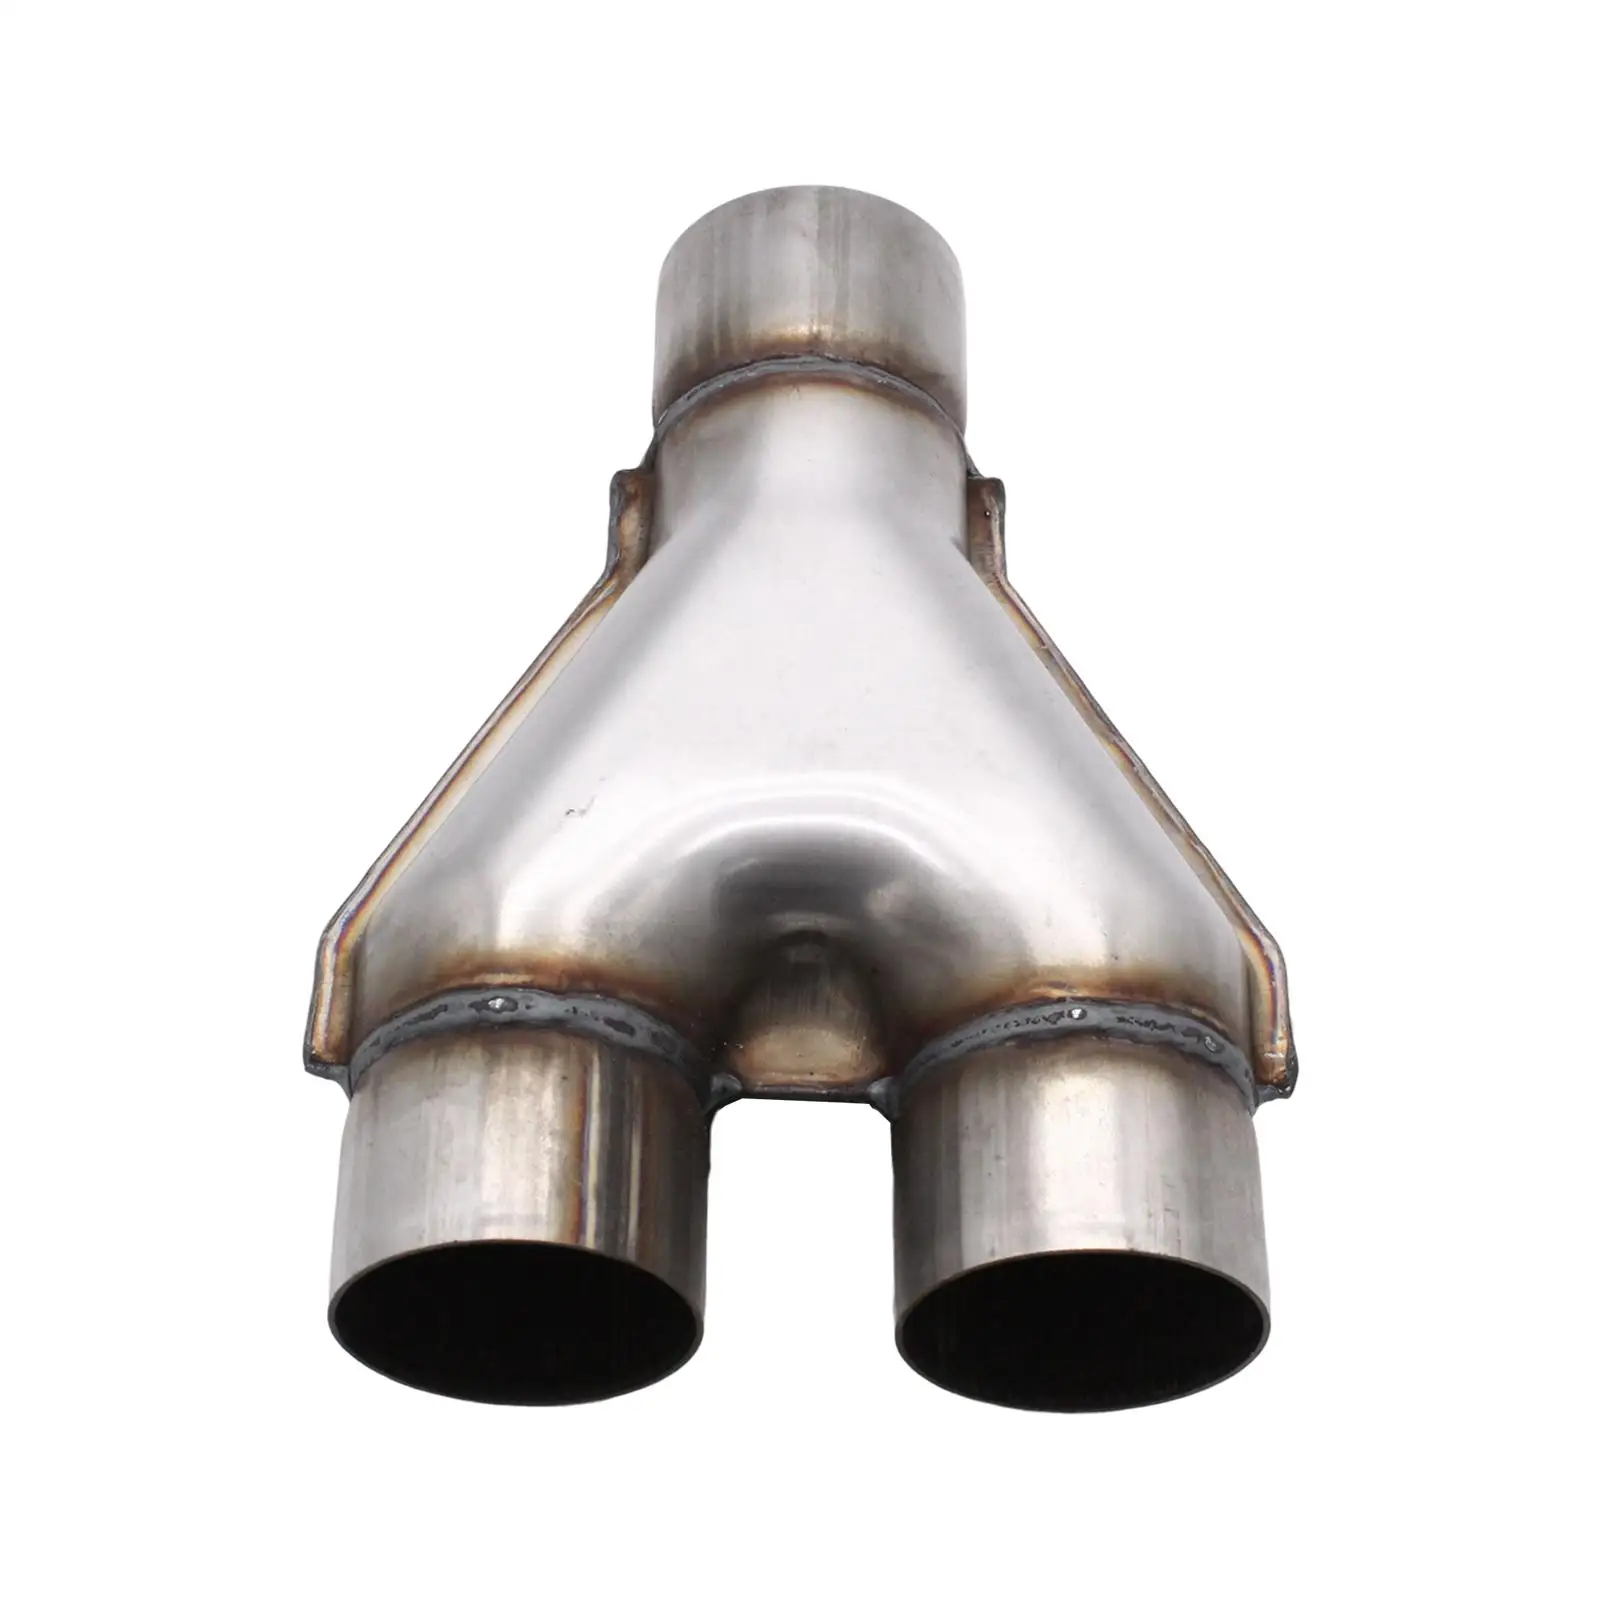 Exhaust Pipe Connector for Smoother Exhaust x Pipe Adapter for Hardware Professional Durable Replacement Easy to Install